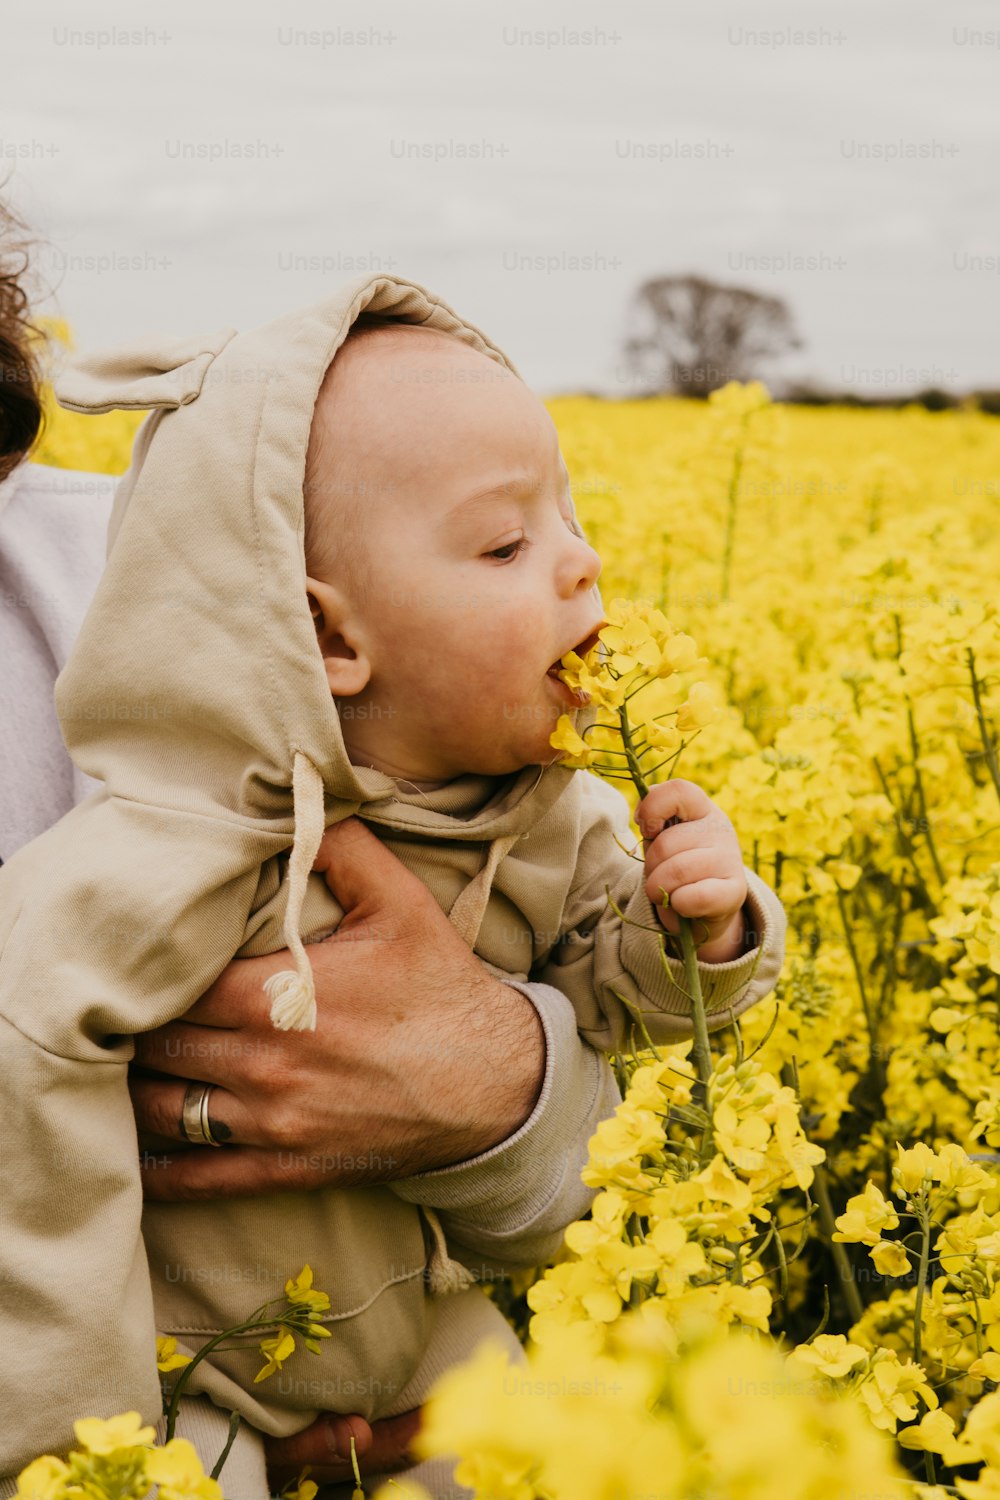 a man holding a baby in a field of yellow flowers